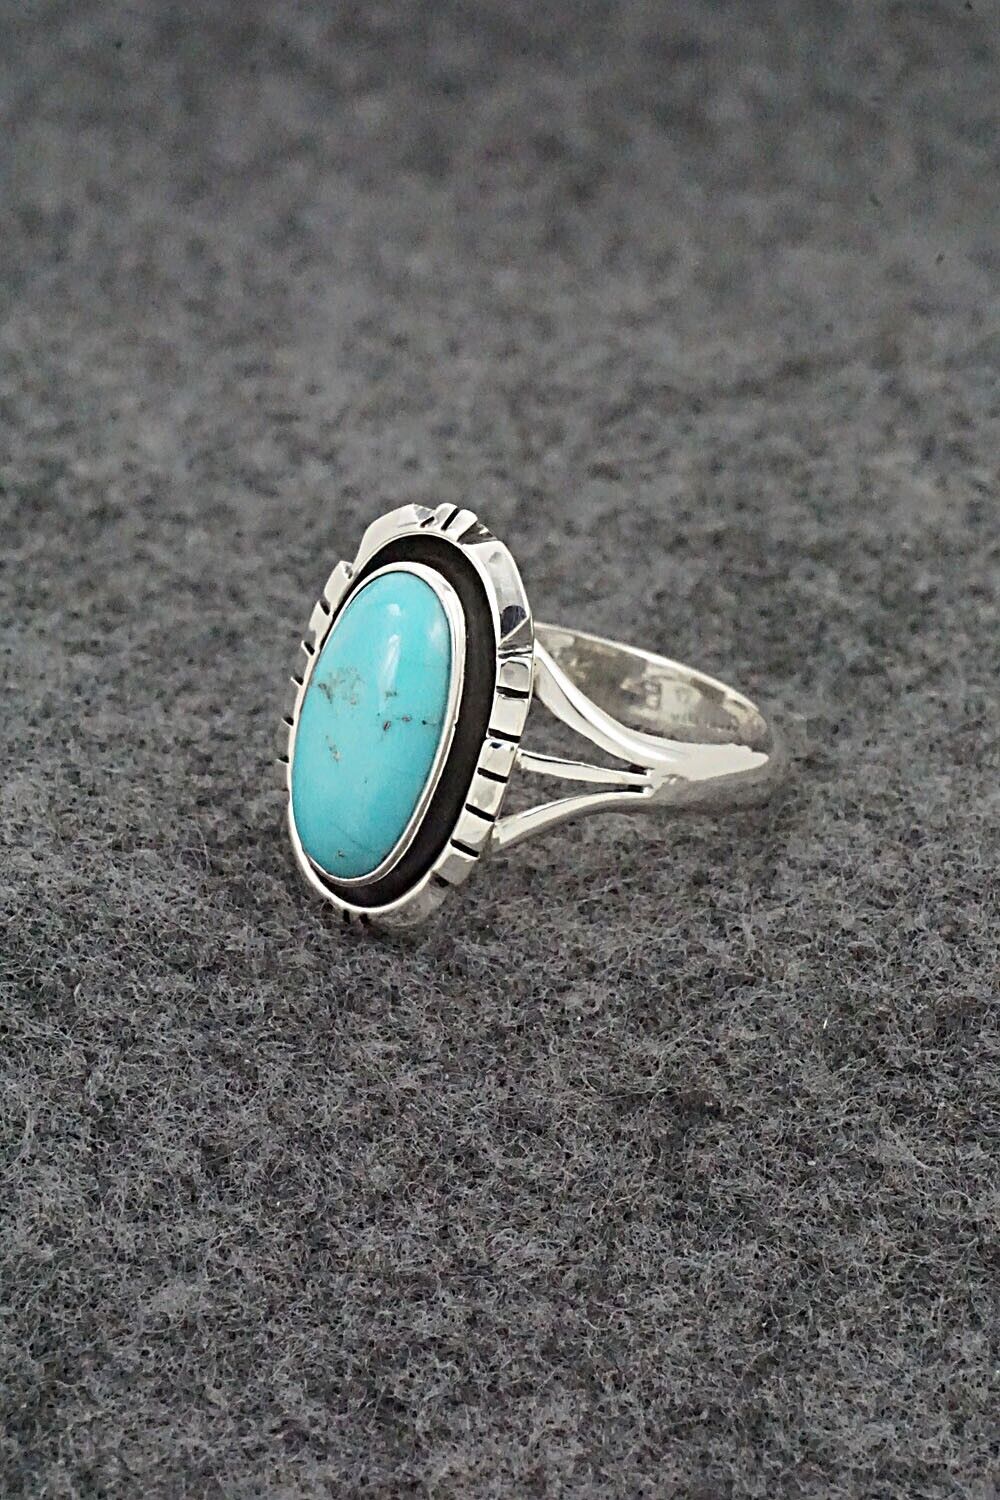 Turquoise & Sterling Silver Ring - Amos Begay - Size 8.5